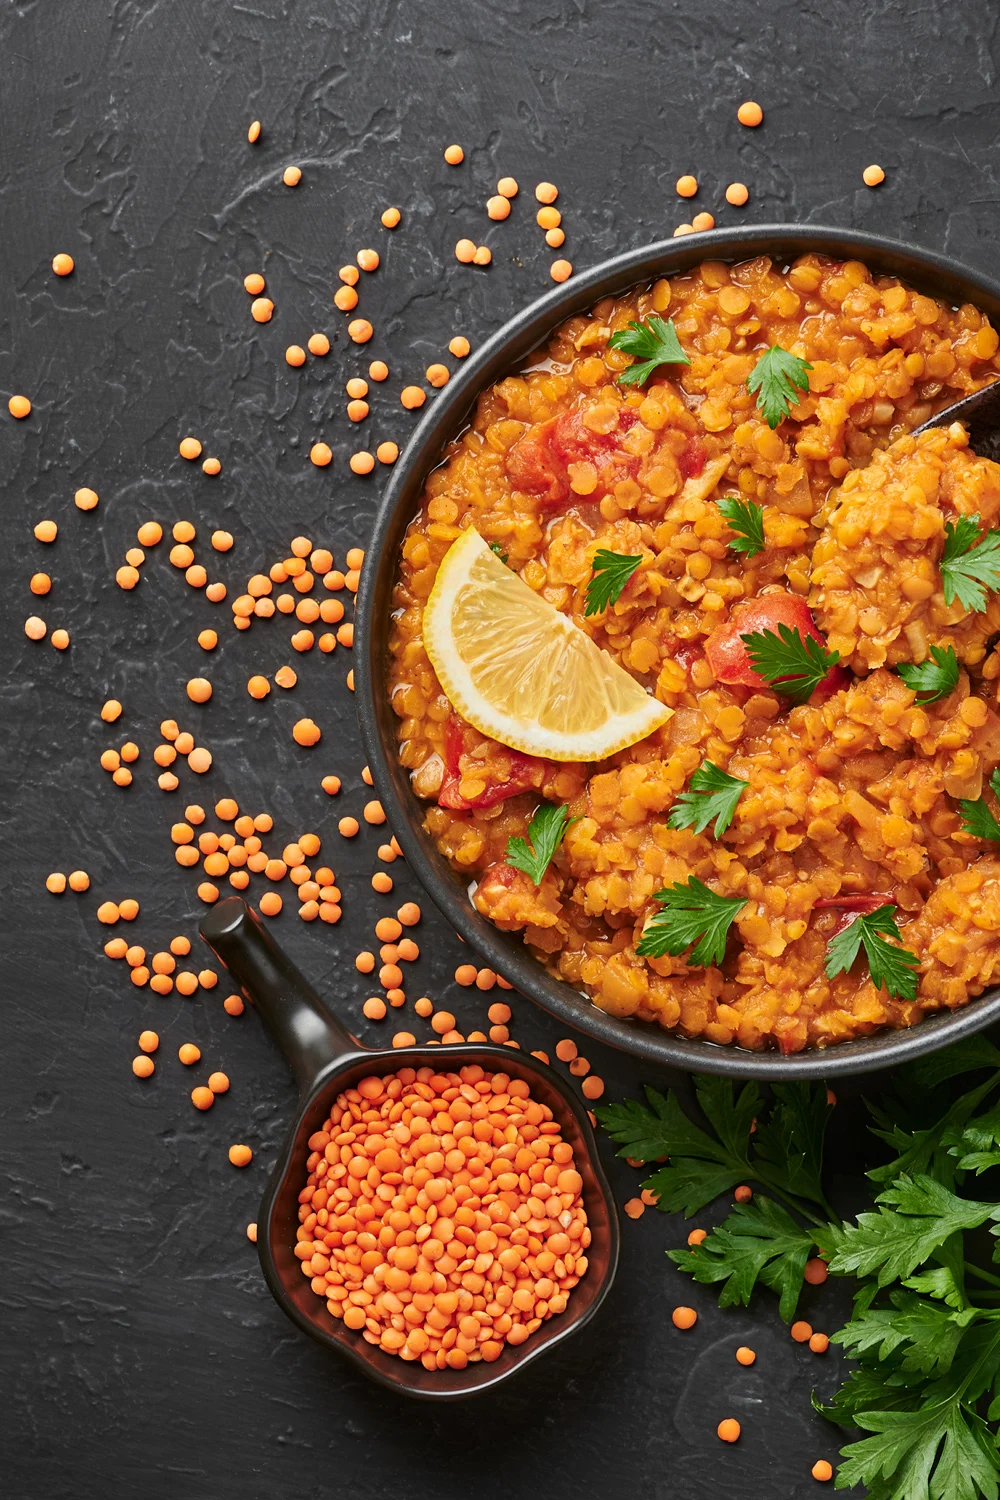 red lentil dhal - a high protein vegan meal